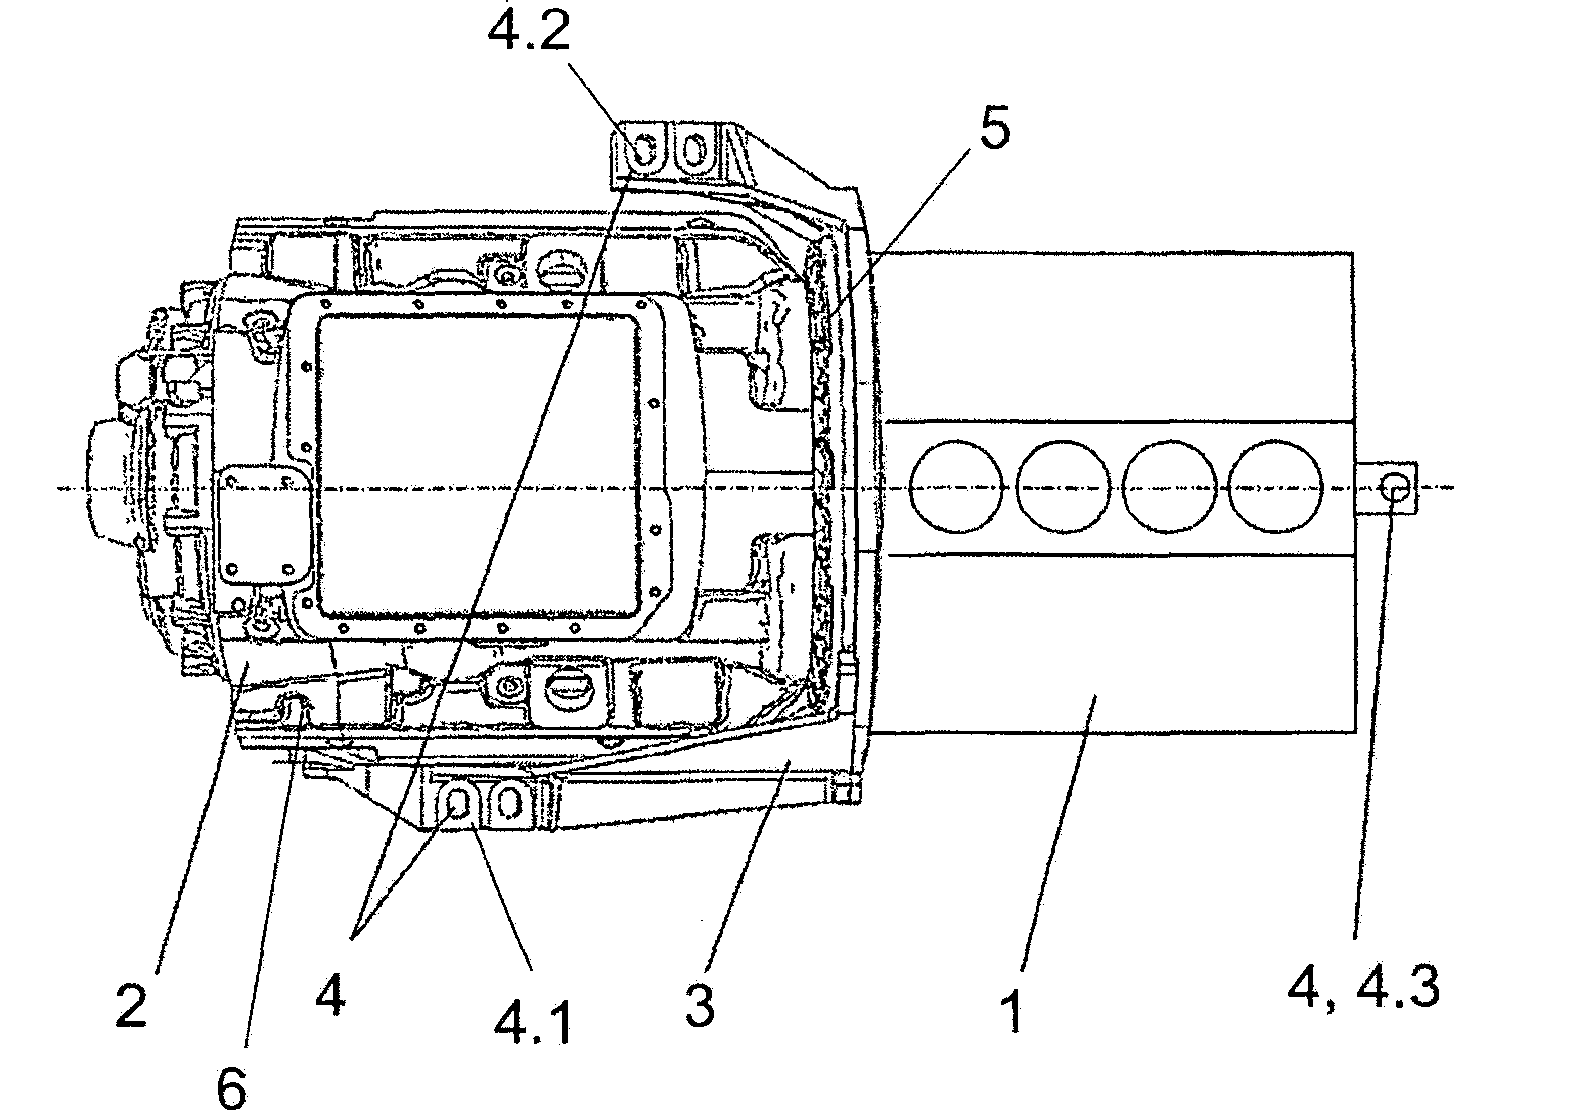 Device for supporting structural unit on internal combustion engine